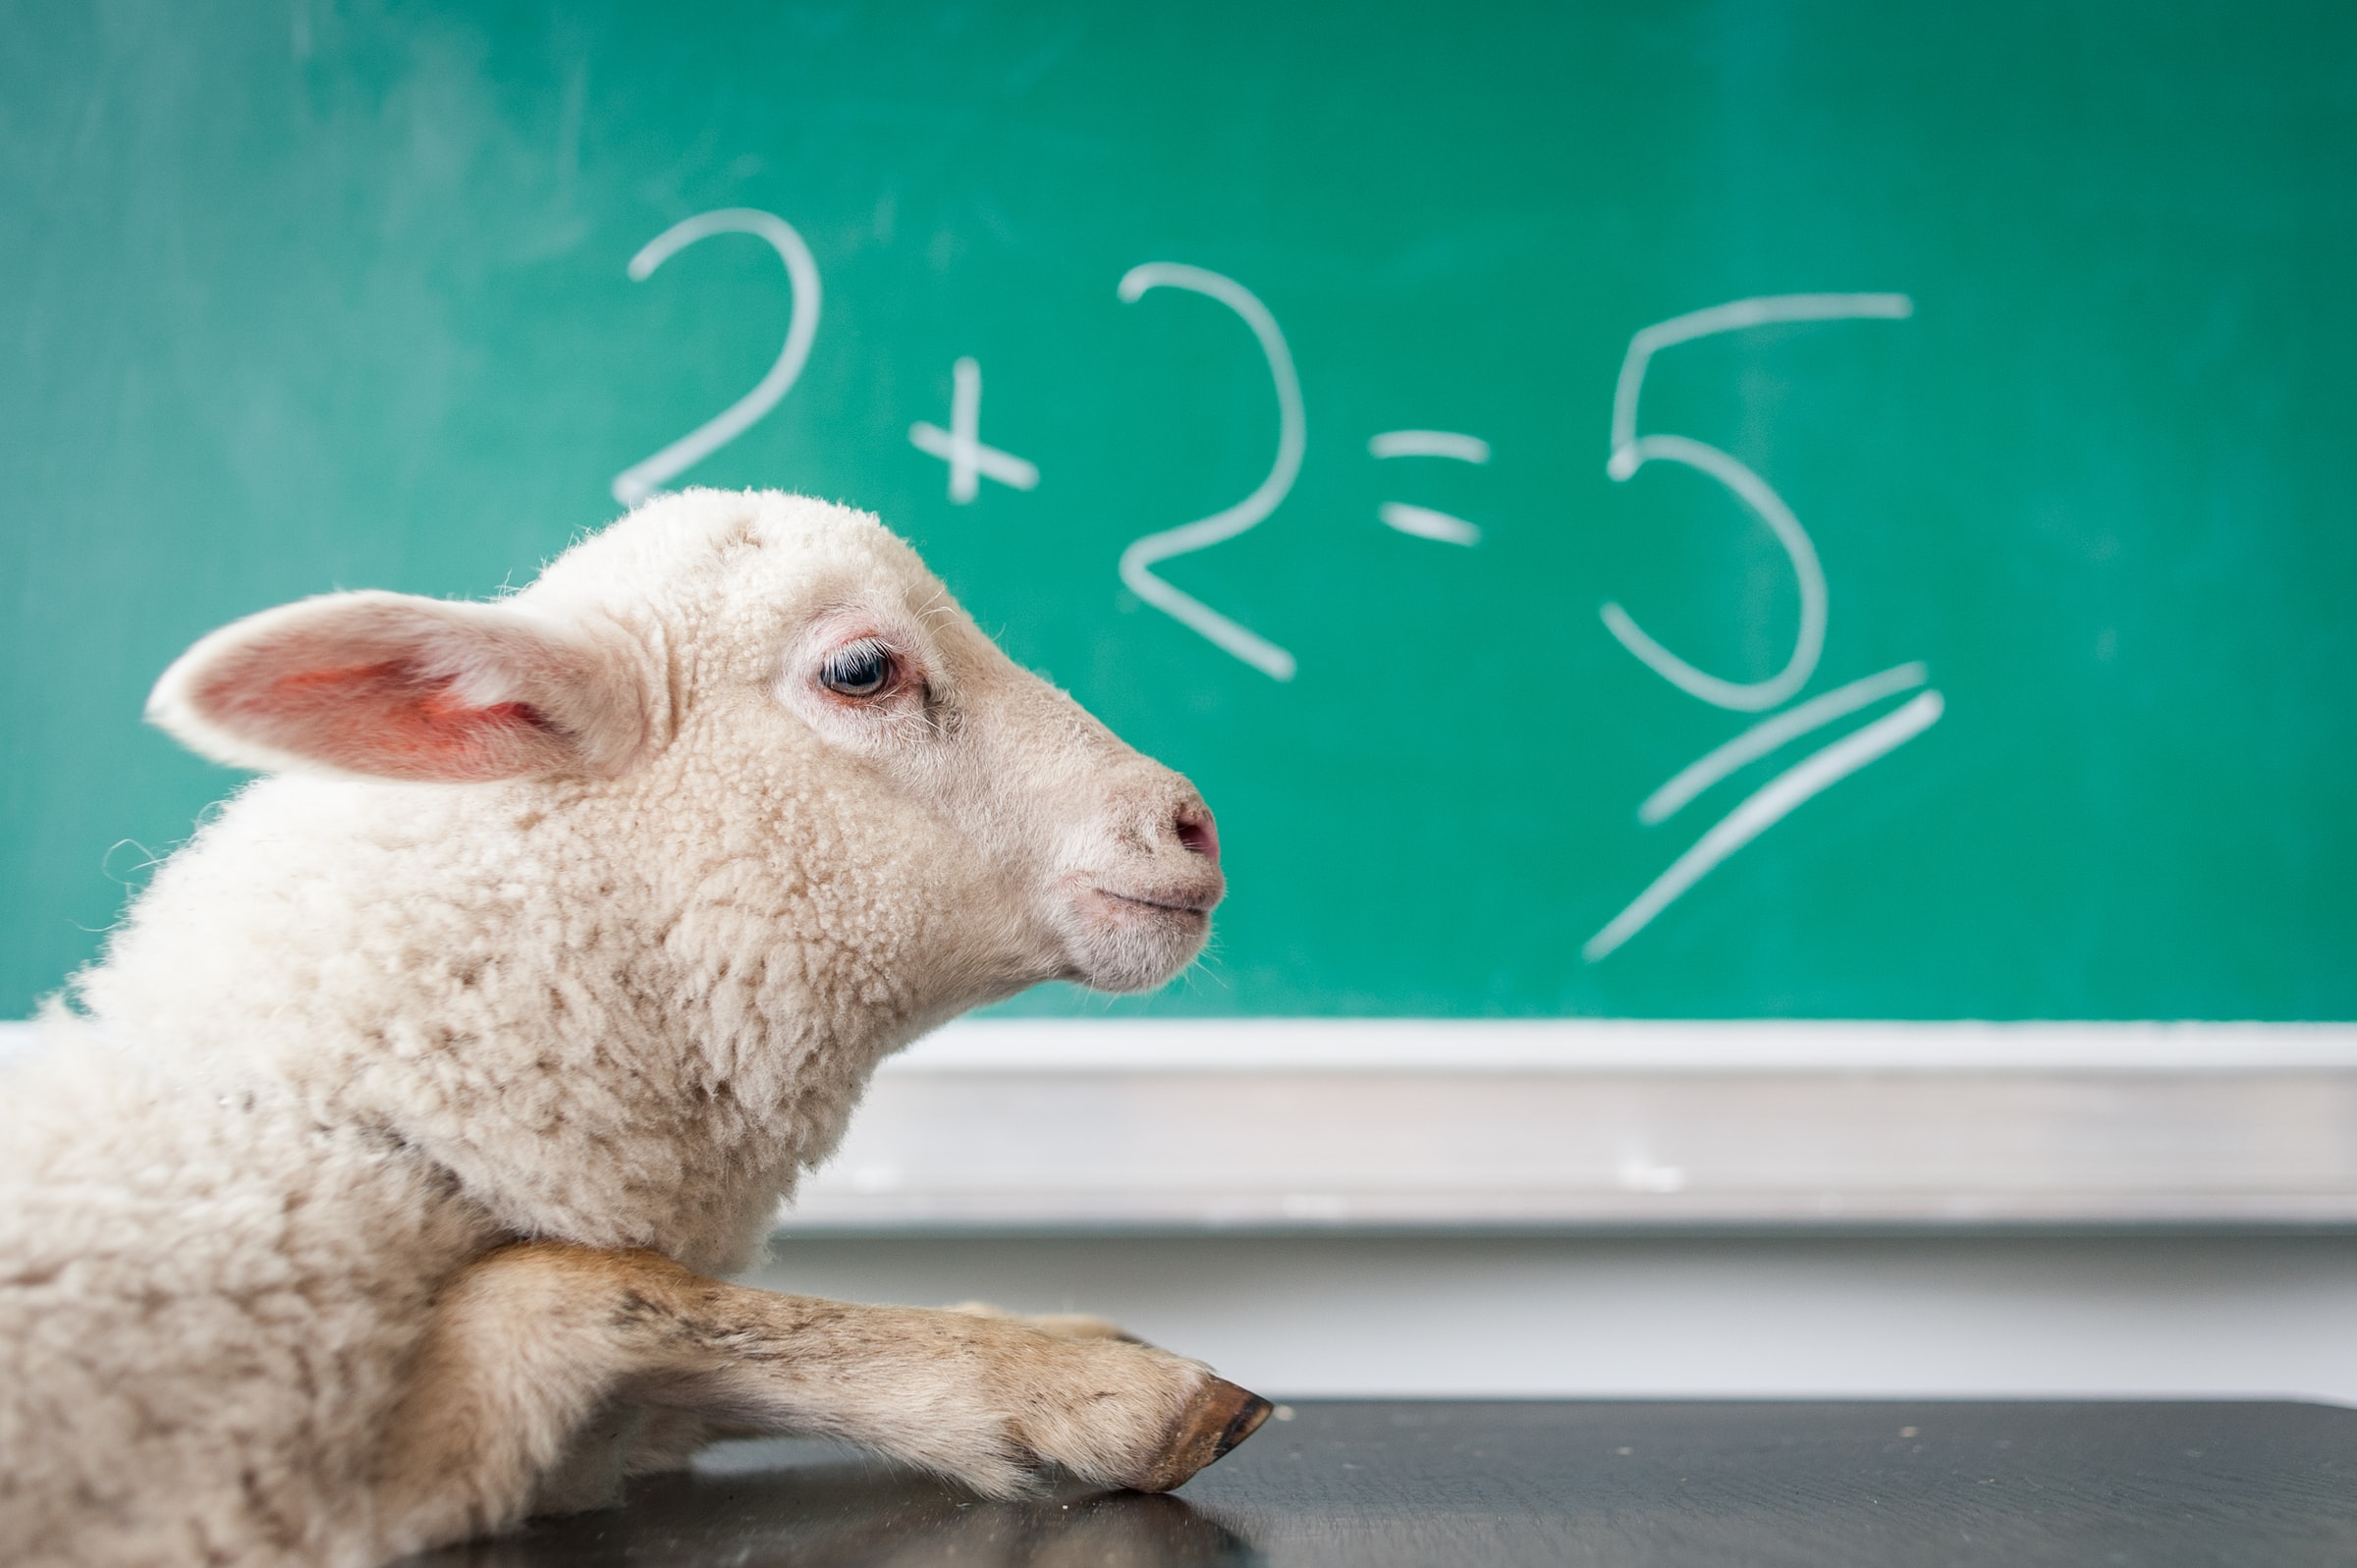 A sheep is sitting and behind there is a blackboard and it is written “2+2=5”.